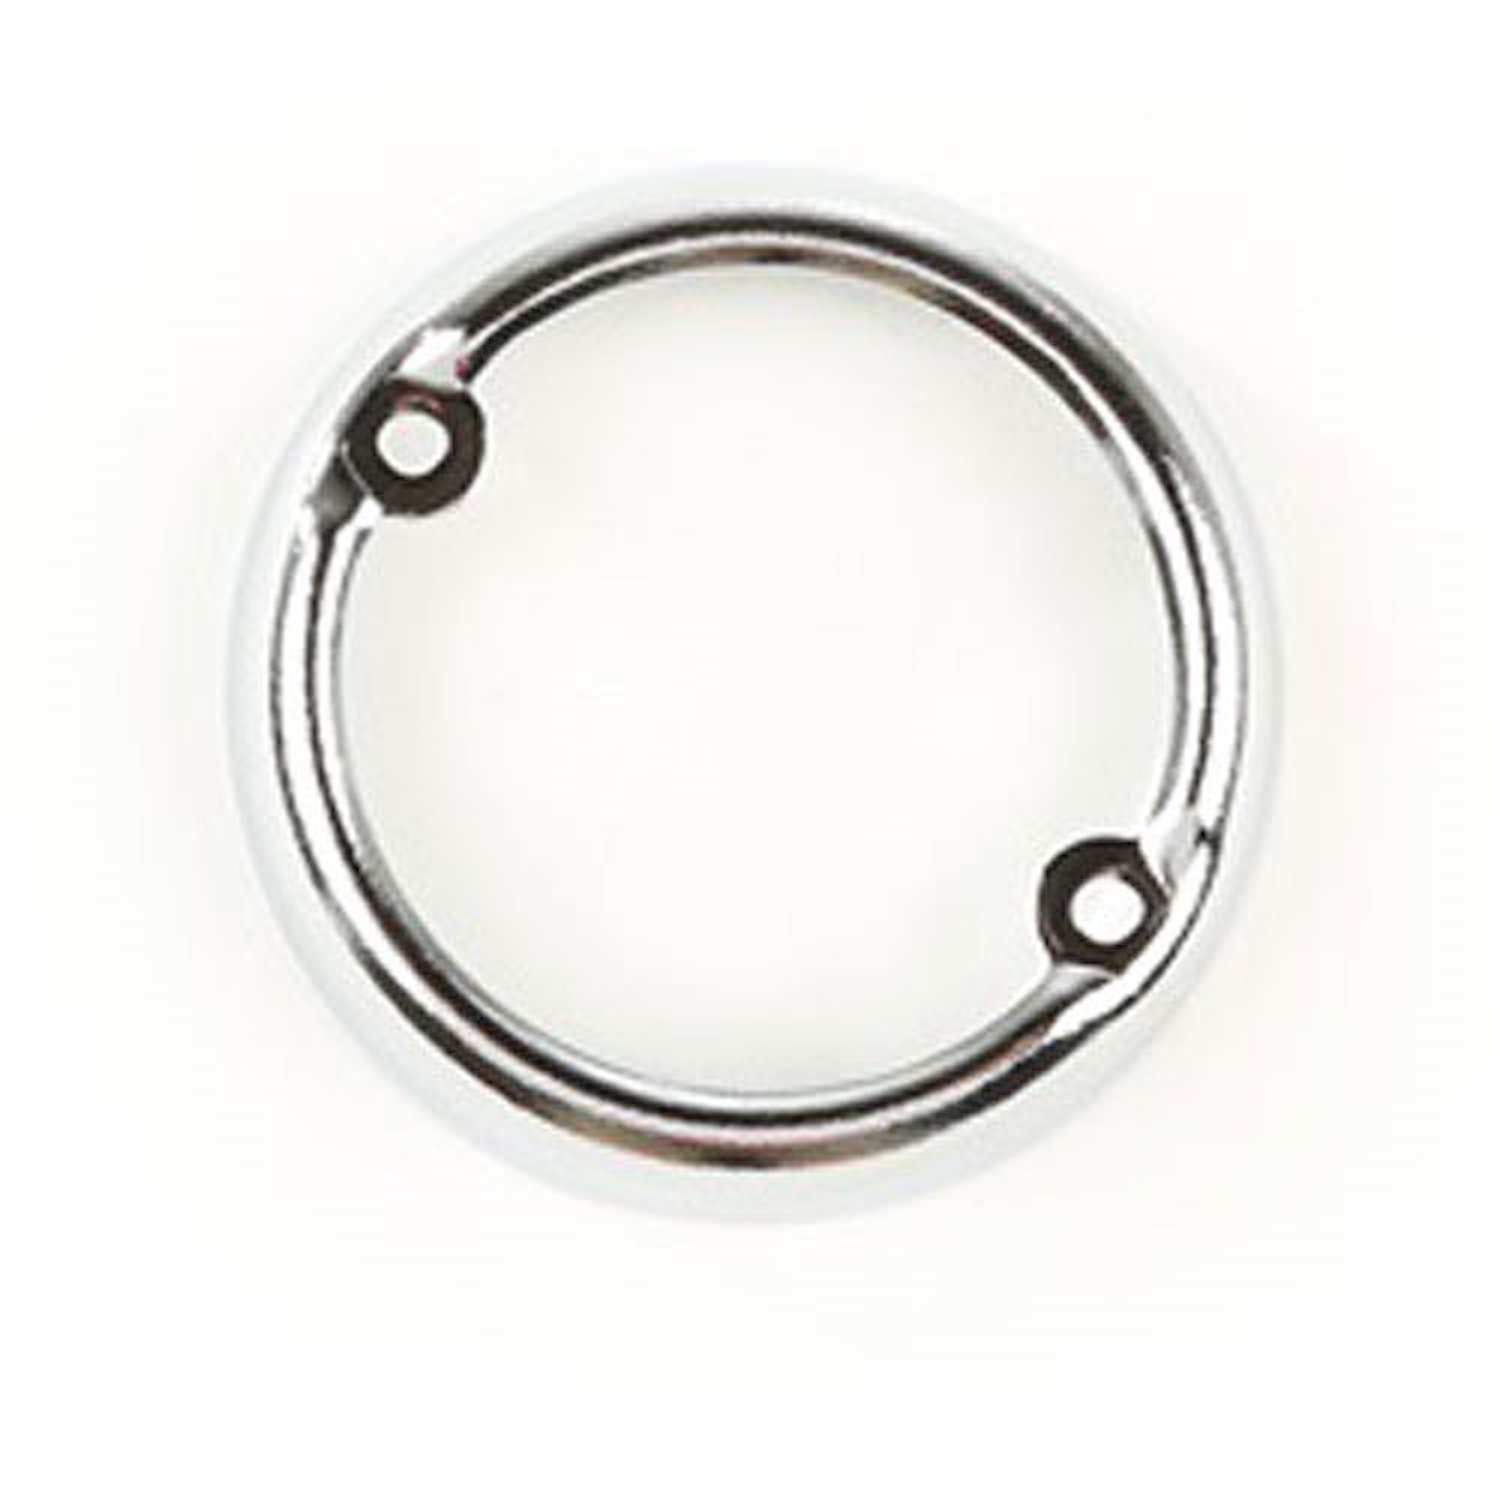 This 2 1/4 inch chrome parking light bezel from Omix-ADA fits 50-51 Willys Jeepsters and 50-64 station wagons & pickups.